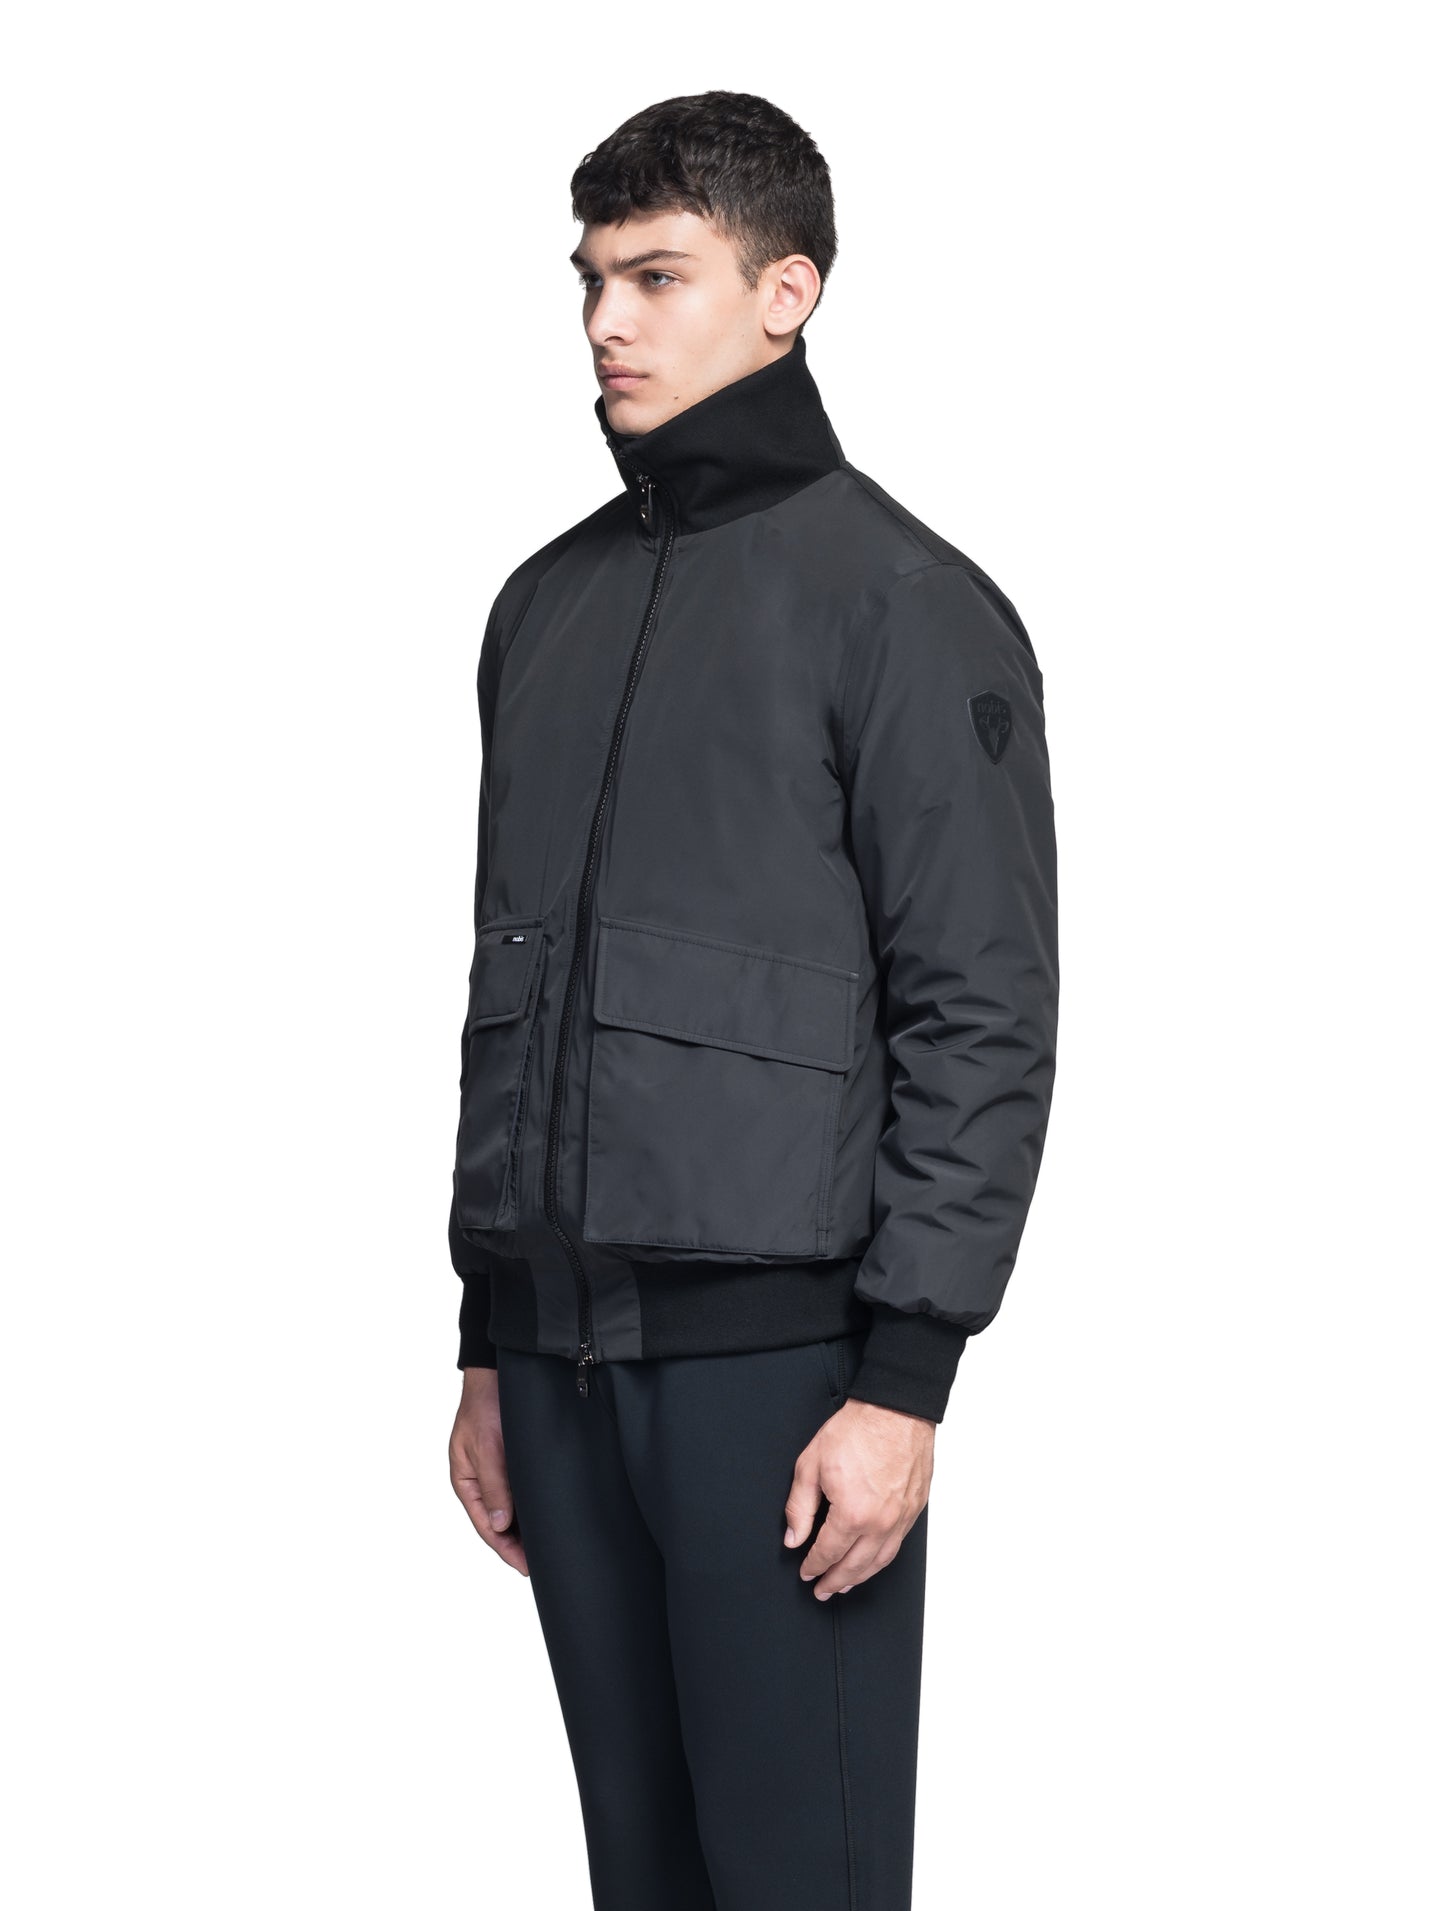 Flint Men's Tailored Rib Collar Jacket in hip length, premium 3-ply Micro Denier fabrication, premium 4-way stretch, water resistant Primaloft Gold Insulation Active +, flap pockets with magnetic closure at waist, side entry pockets at waist, ribbed sleeve cuffs, two-way branded zipper at centre front, box pleat detailing at centre back, large interior zipper pocket, and interior button pocket at left chest, in Black